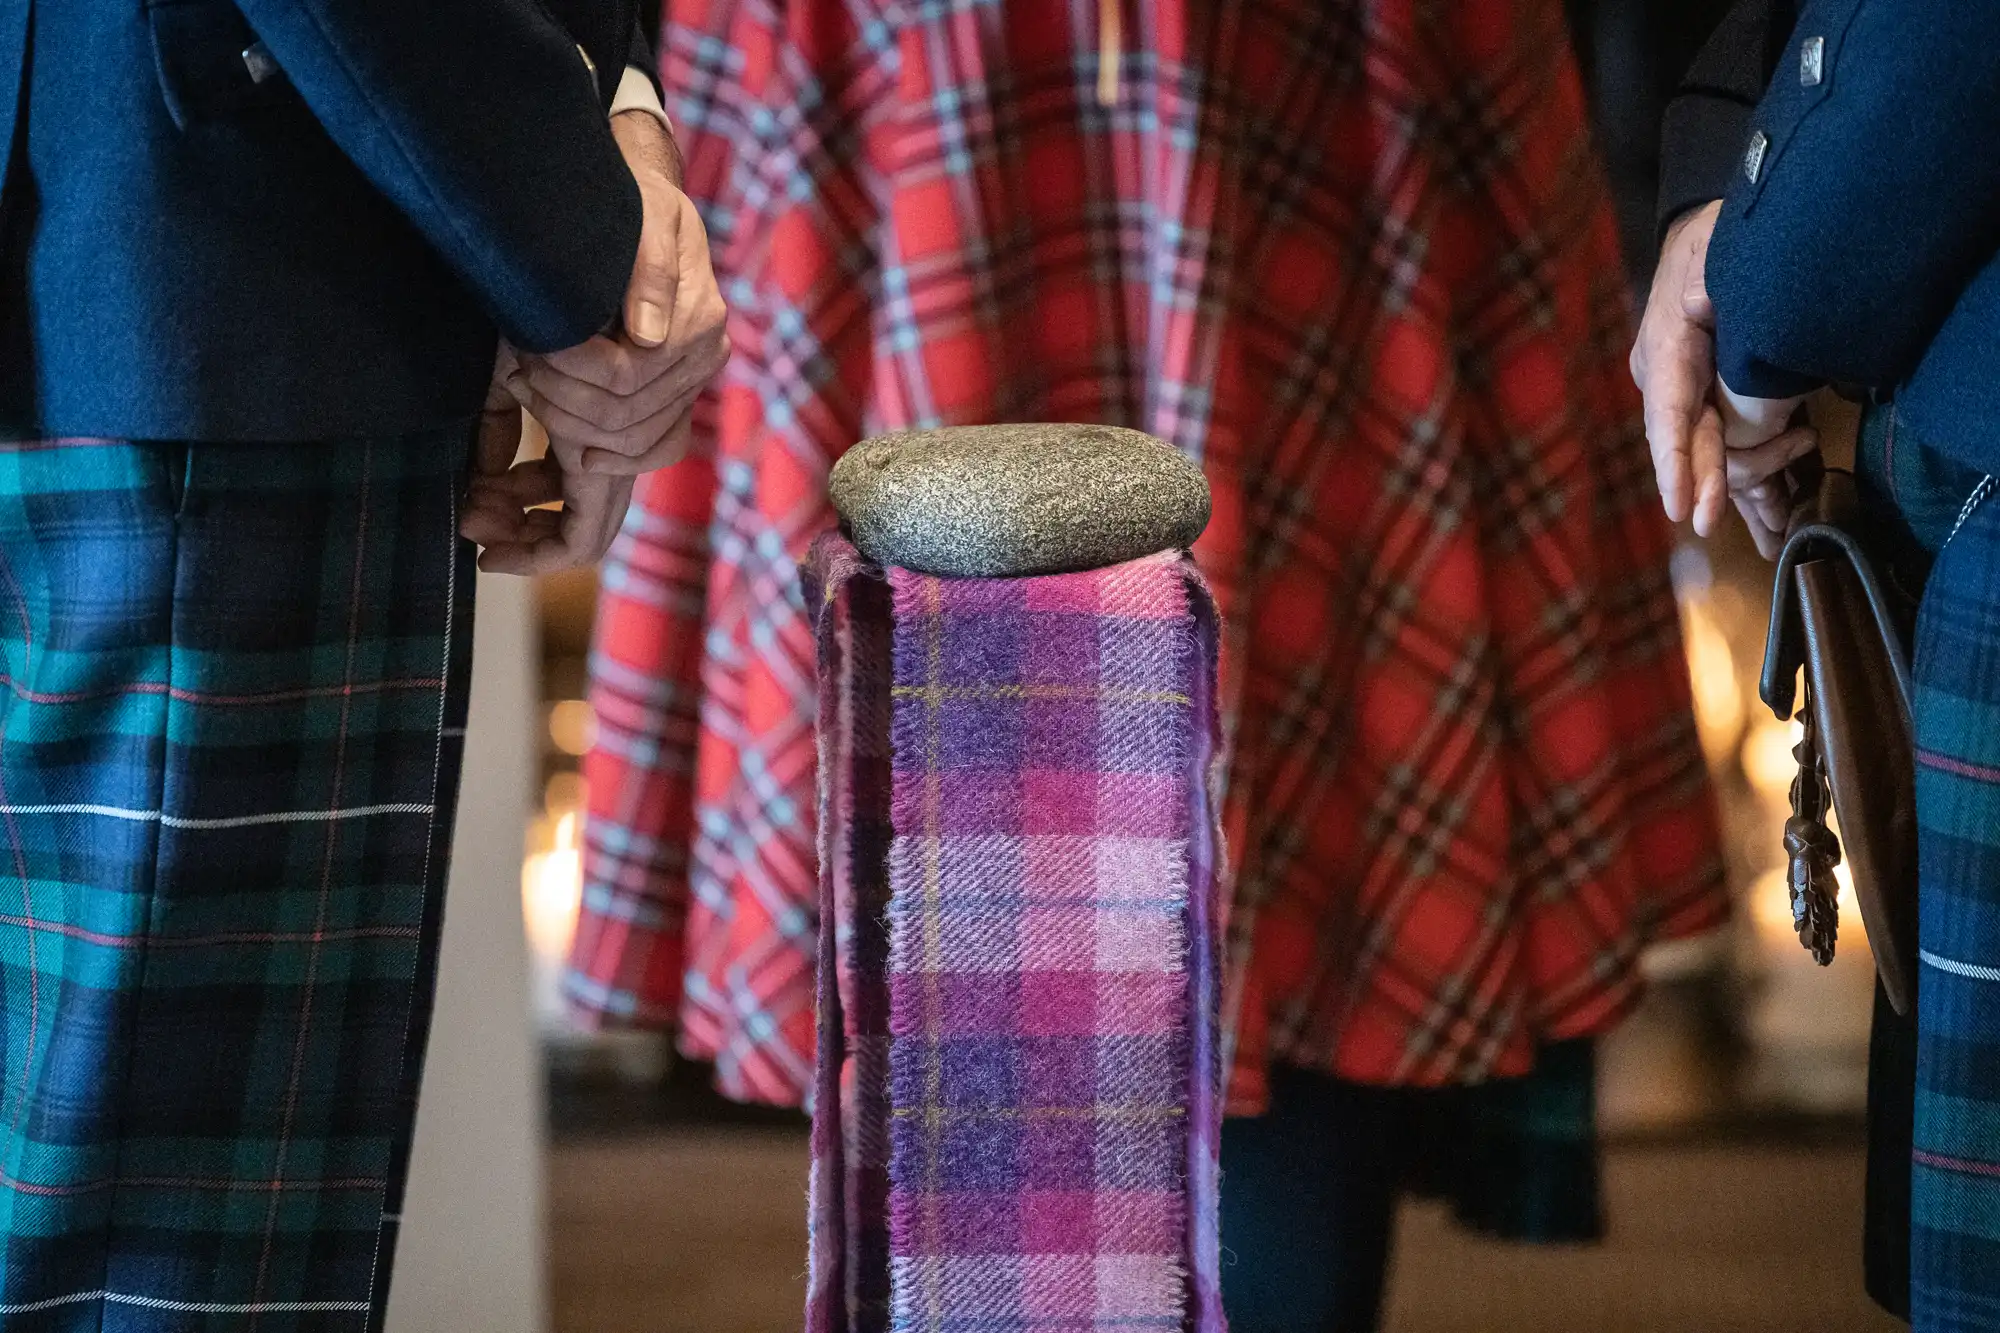 Three people in tartan clothing stand around a stone placed on a fabric-covered pedestal.